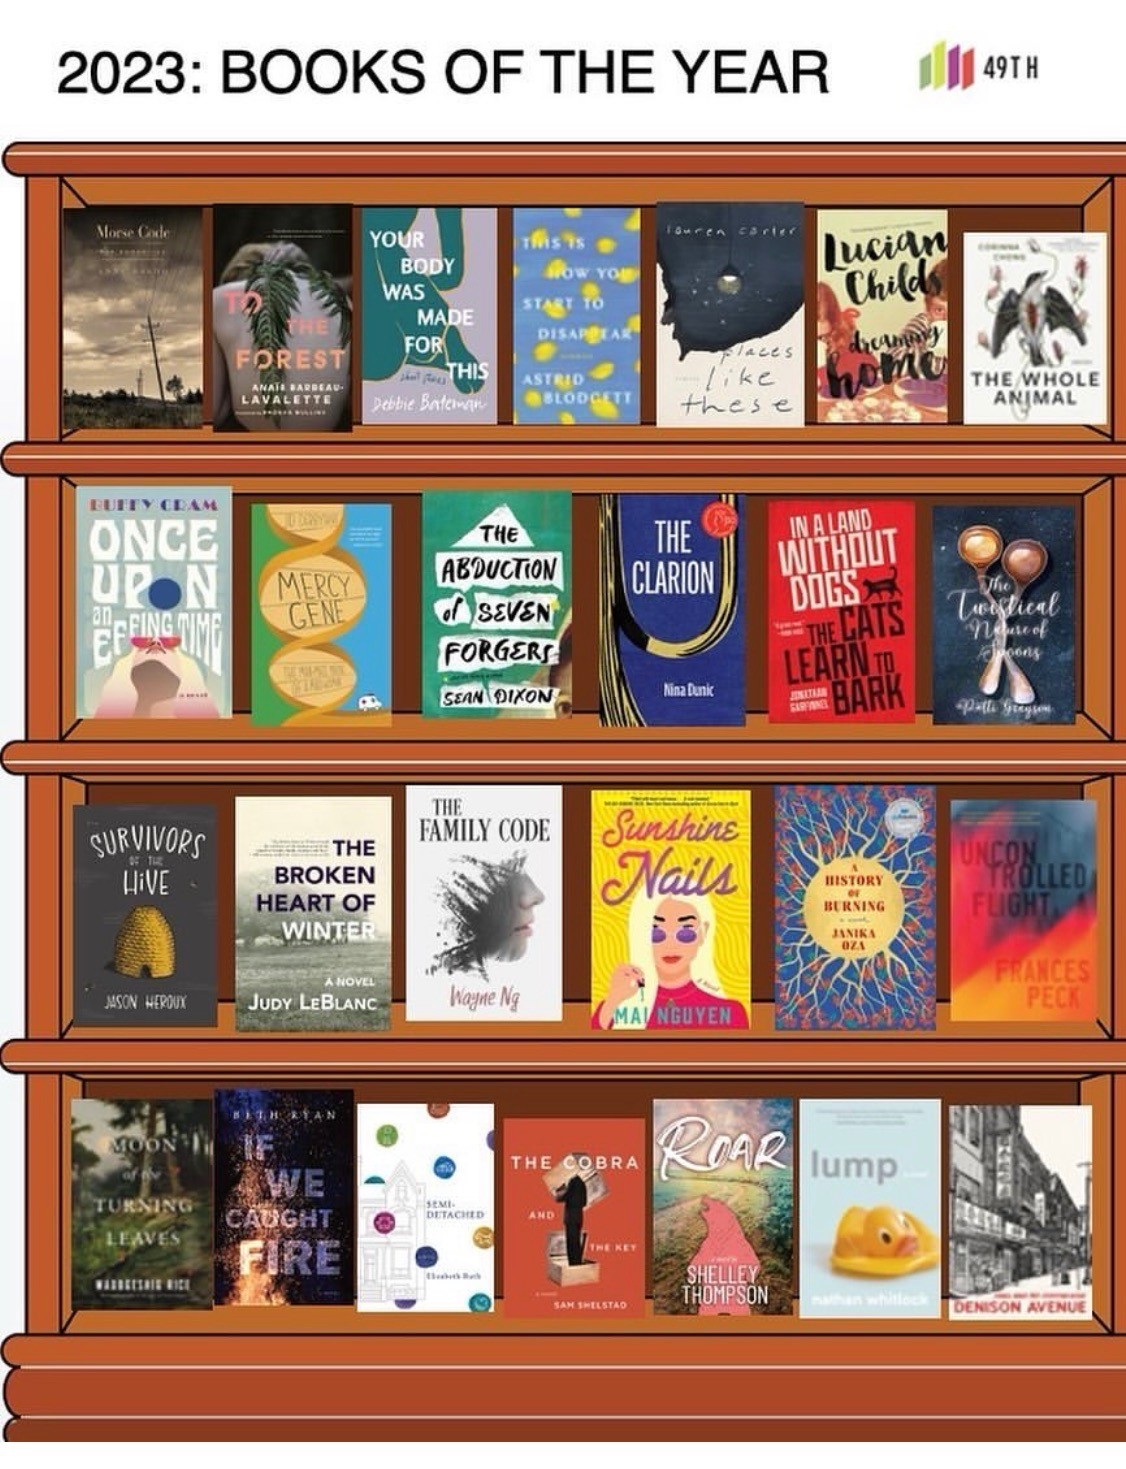 Bookshelf filled with the 26 books named the best fiction of 2023 by 49th Shelf.